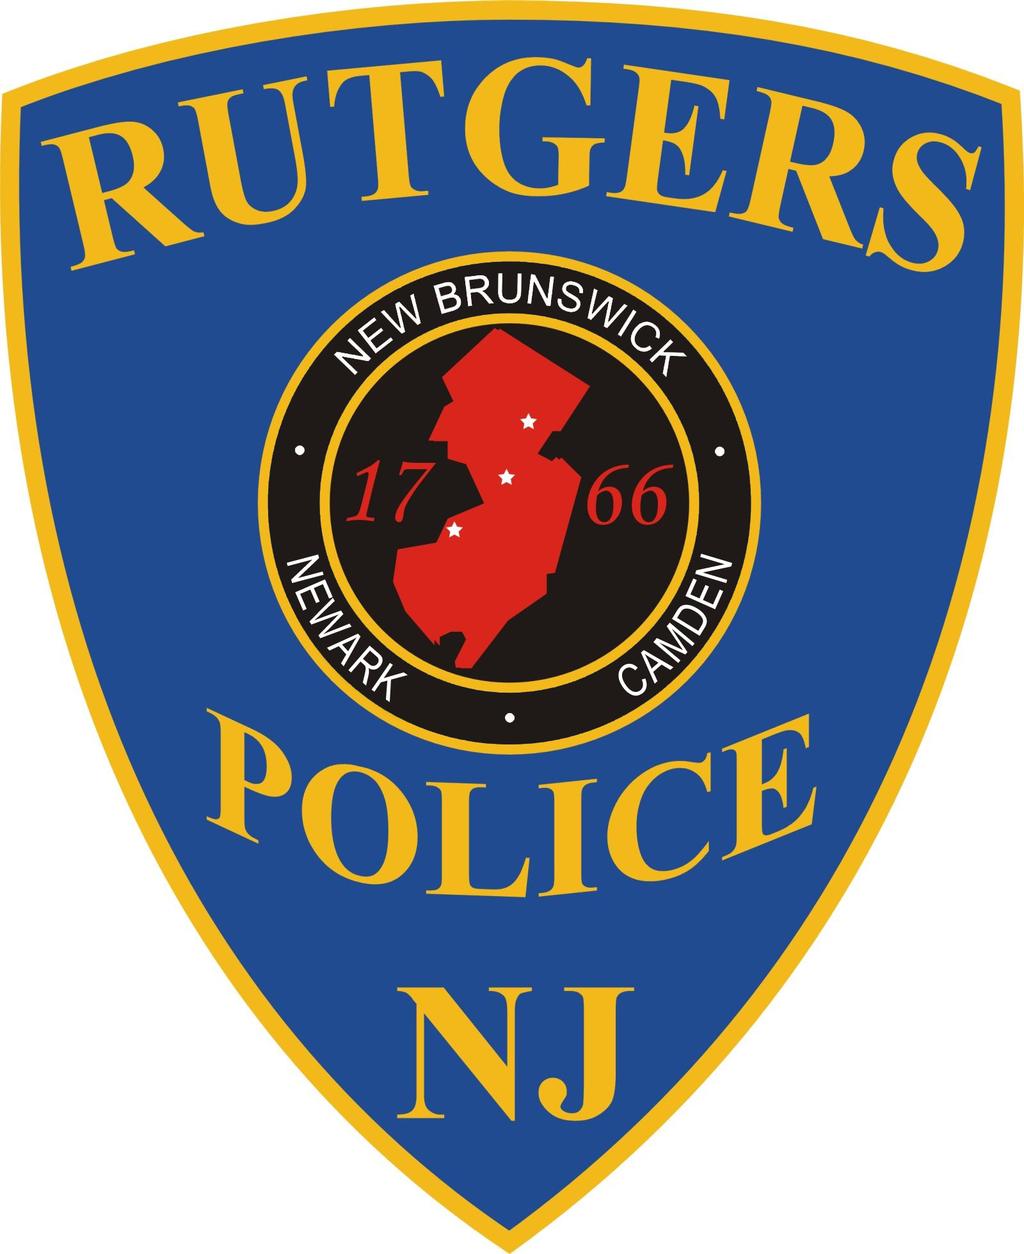 Daily Crime and Fire Safety Log Rutgers PD Monday 01 October 2018 Wednesday 31 October 2018 Incident 183000600 Improper Behavior/Disorderly Conduct 10/01/18 1206Hrs 10/01/18 1149Hrs NURSING & SCIENCE